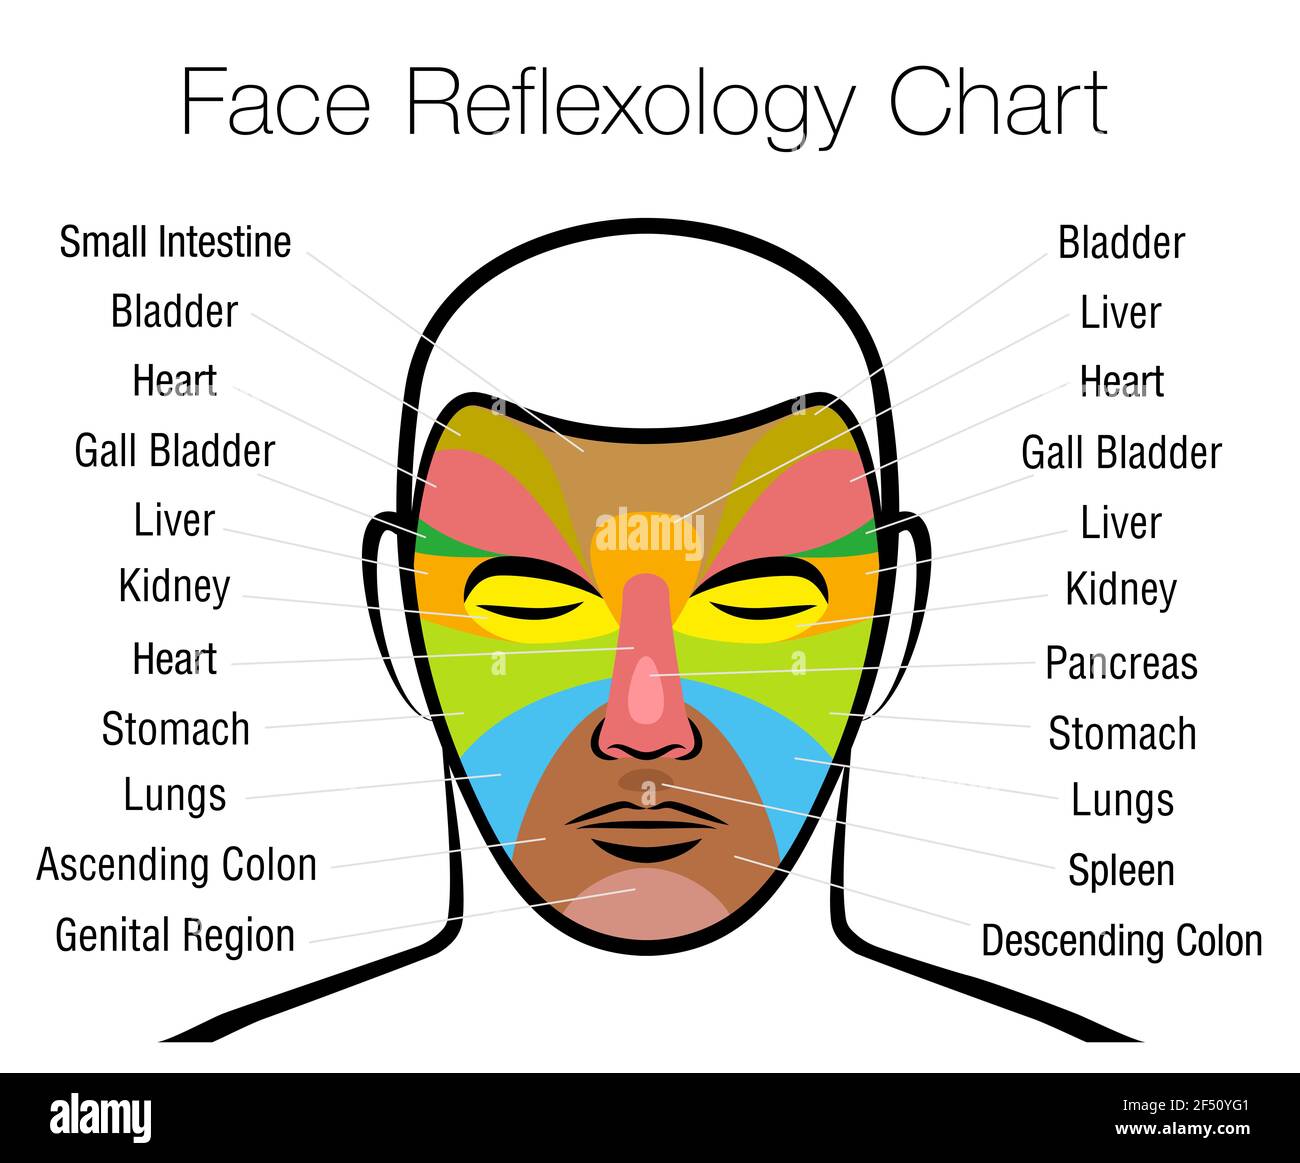 Face reflexology chart. Alternative acupressure and physiotherapy health treatment. Zone massage chart with colored areas and names of internal organs. Stock Photo